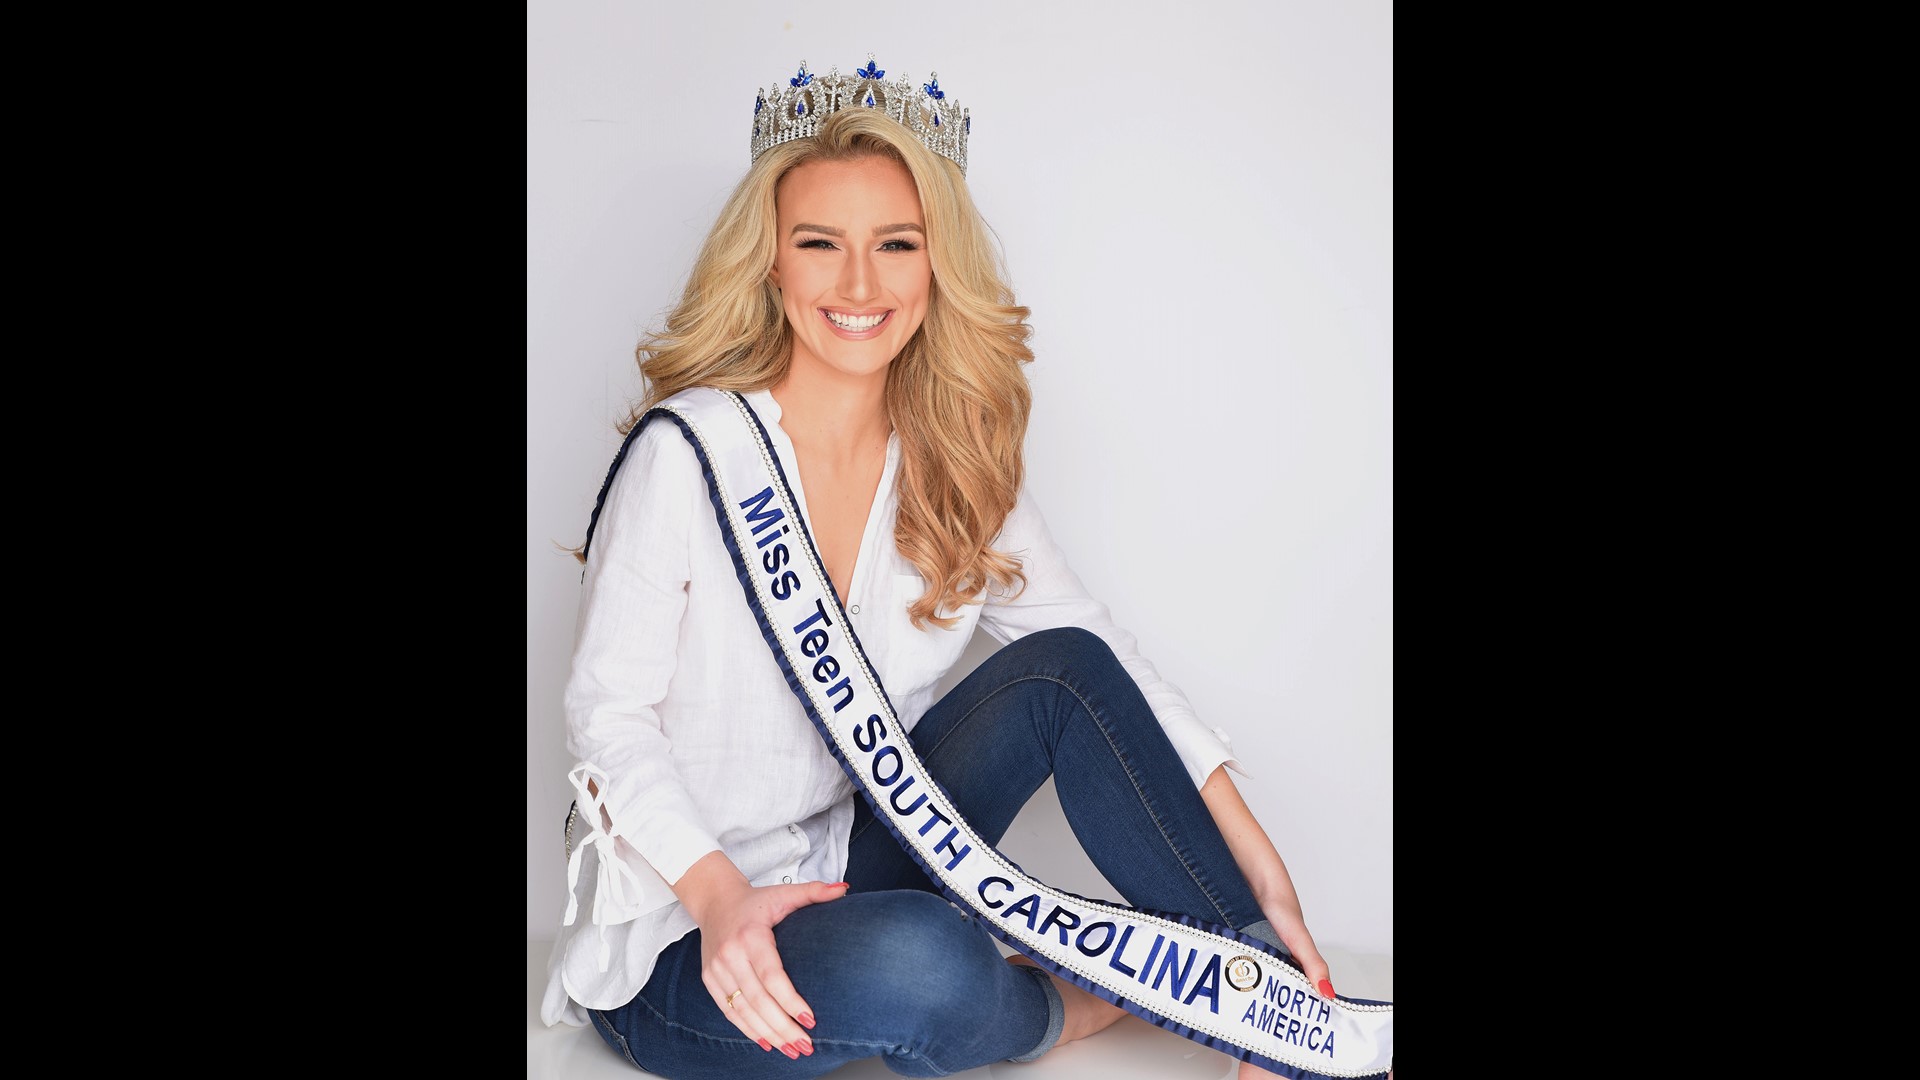 Lily Richter is a Irmo High Senior who currently holds two titles: Miss Yellow Jacket and Miss Teen South Carolina North America. She will be representing South Carolina in an international pageant that includes Canada and Mexico in June.